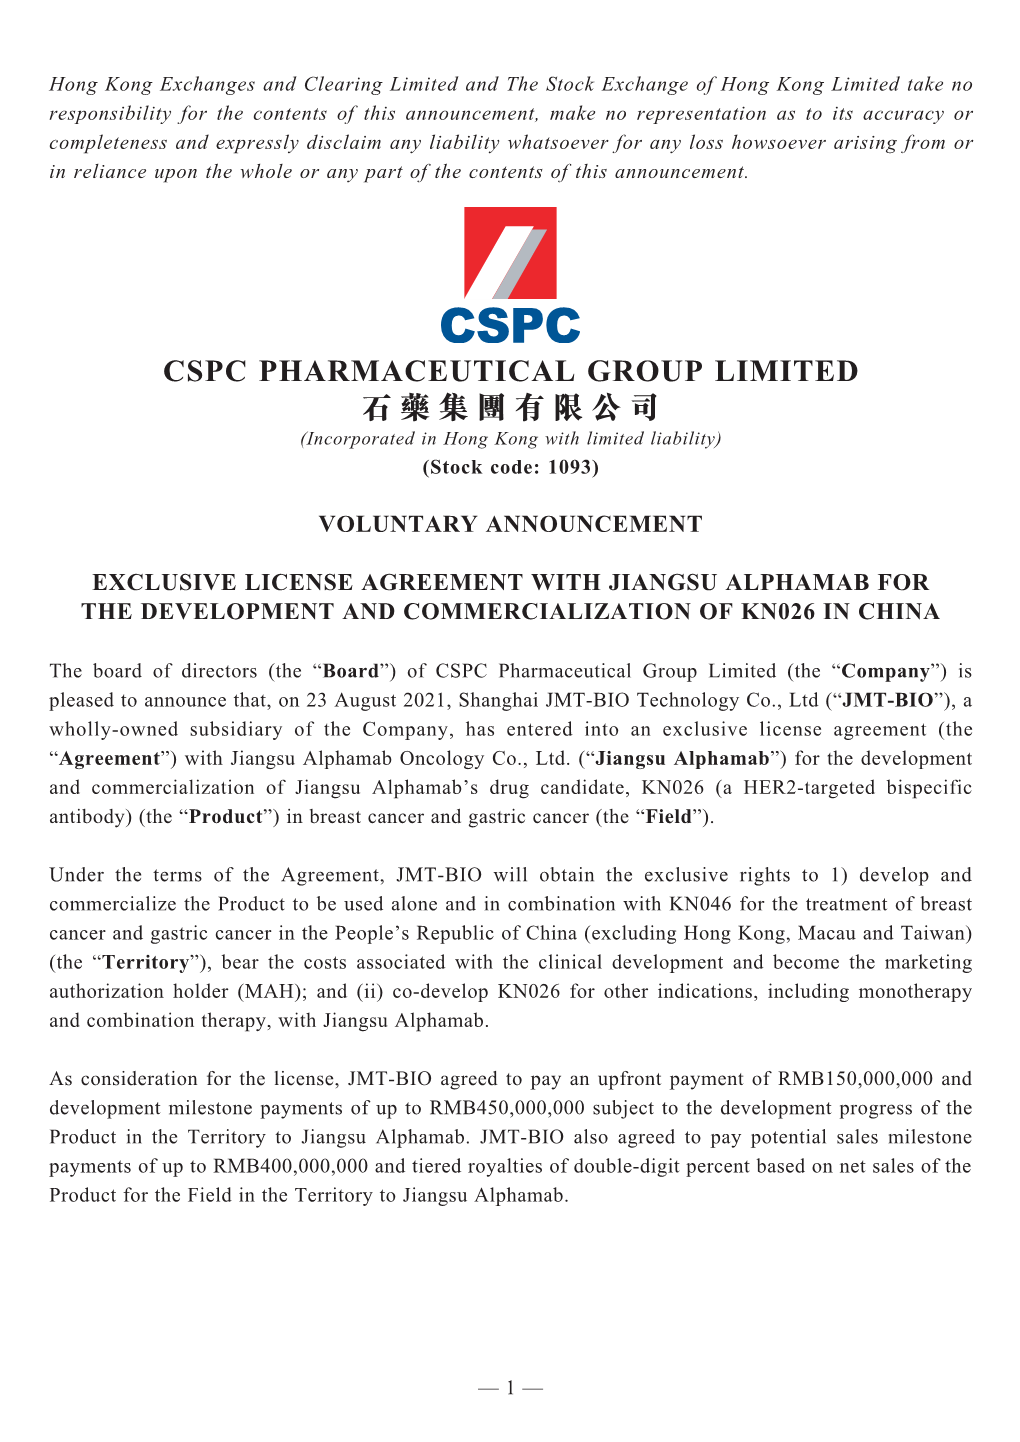 CSPC PHARMACEUTICAL GROUP LIMITED 石藥集團有限公司 (Incorporated in Hong Kong with Limited Liability) (Stock Code: 1093)